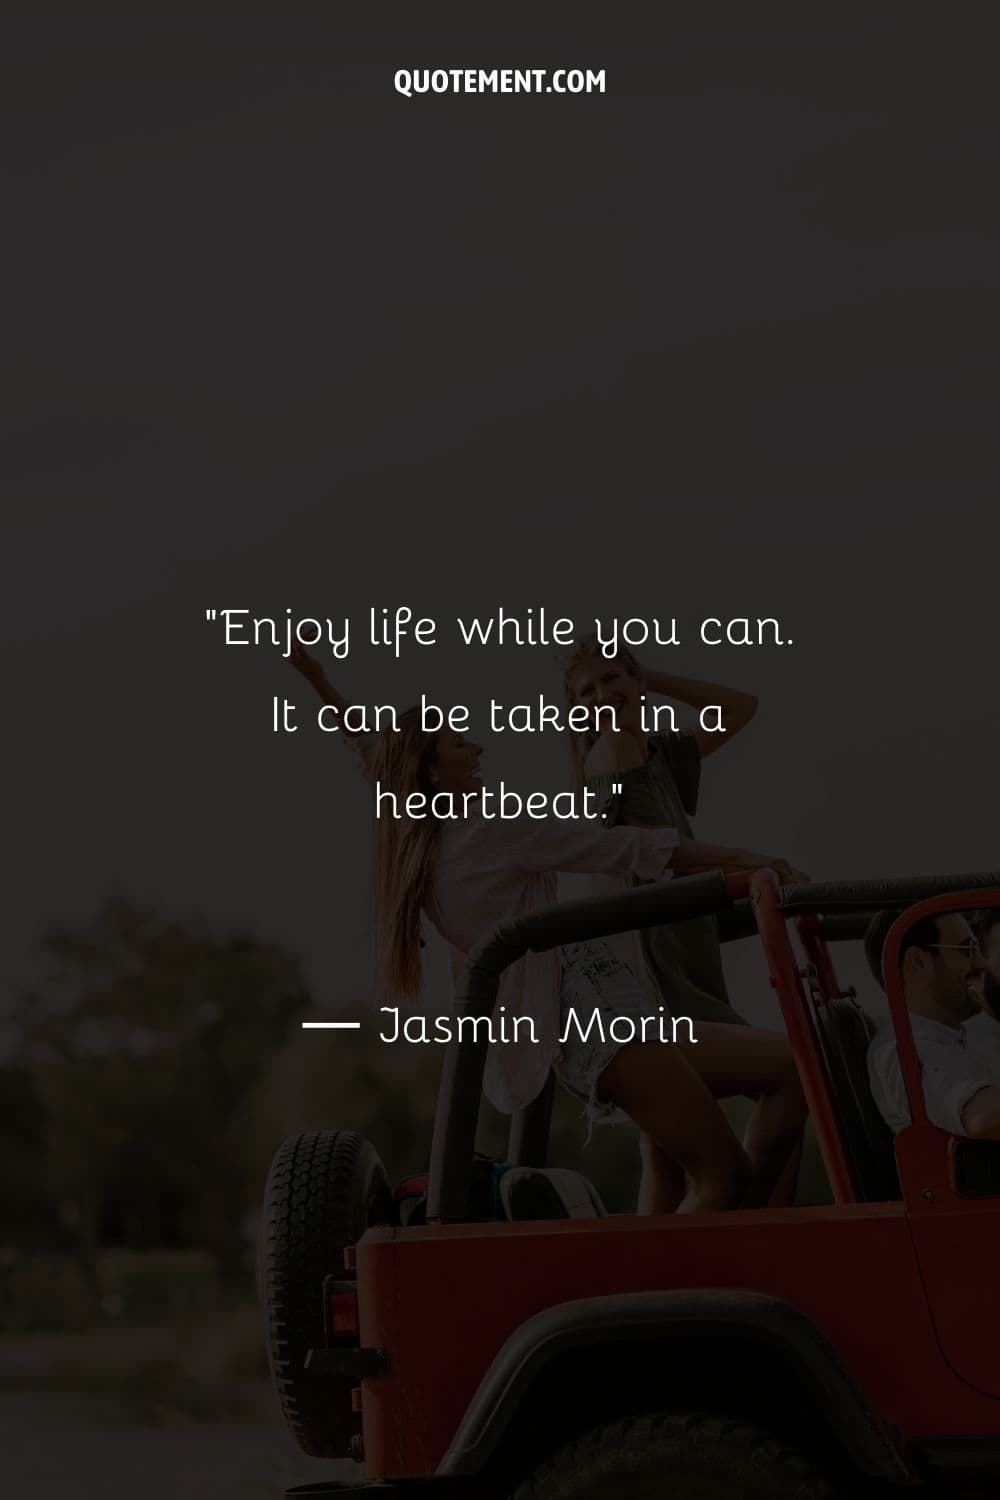 Enjoy life while you can. It can be taken in a heartbeat.